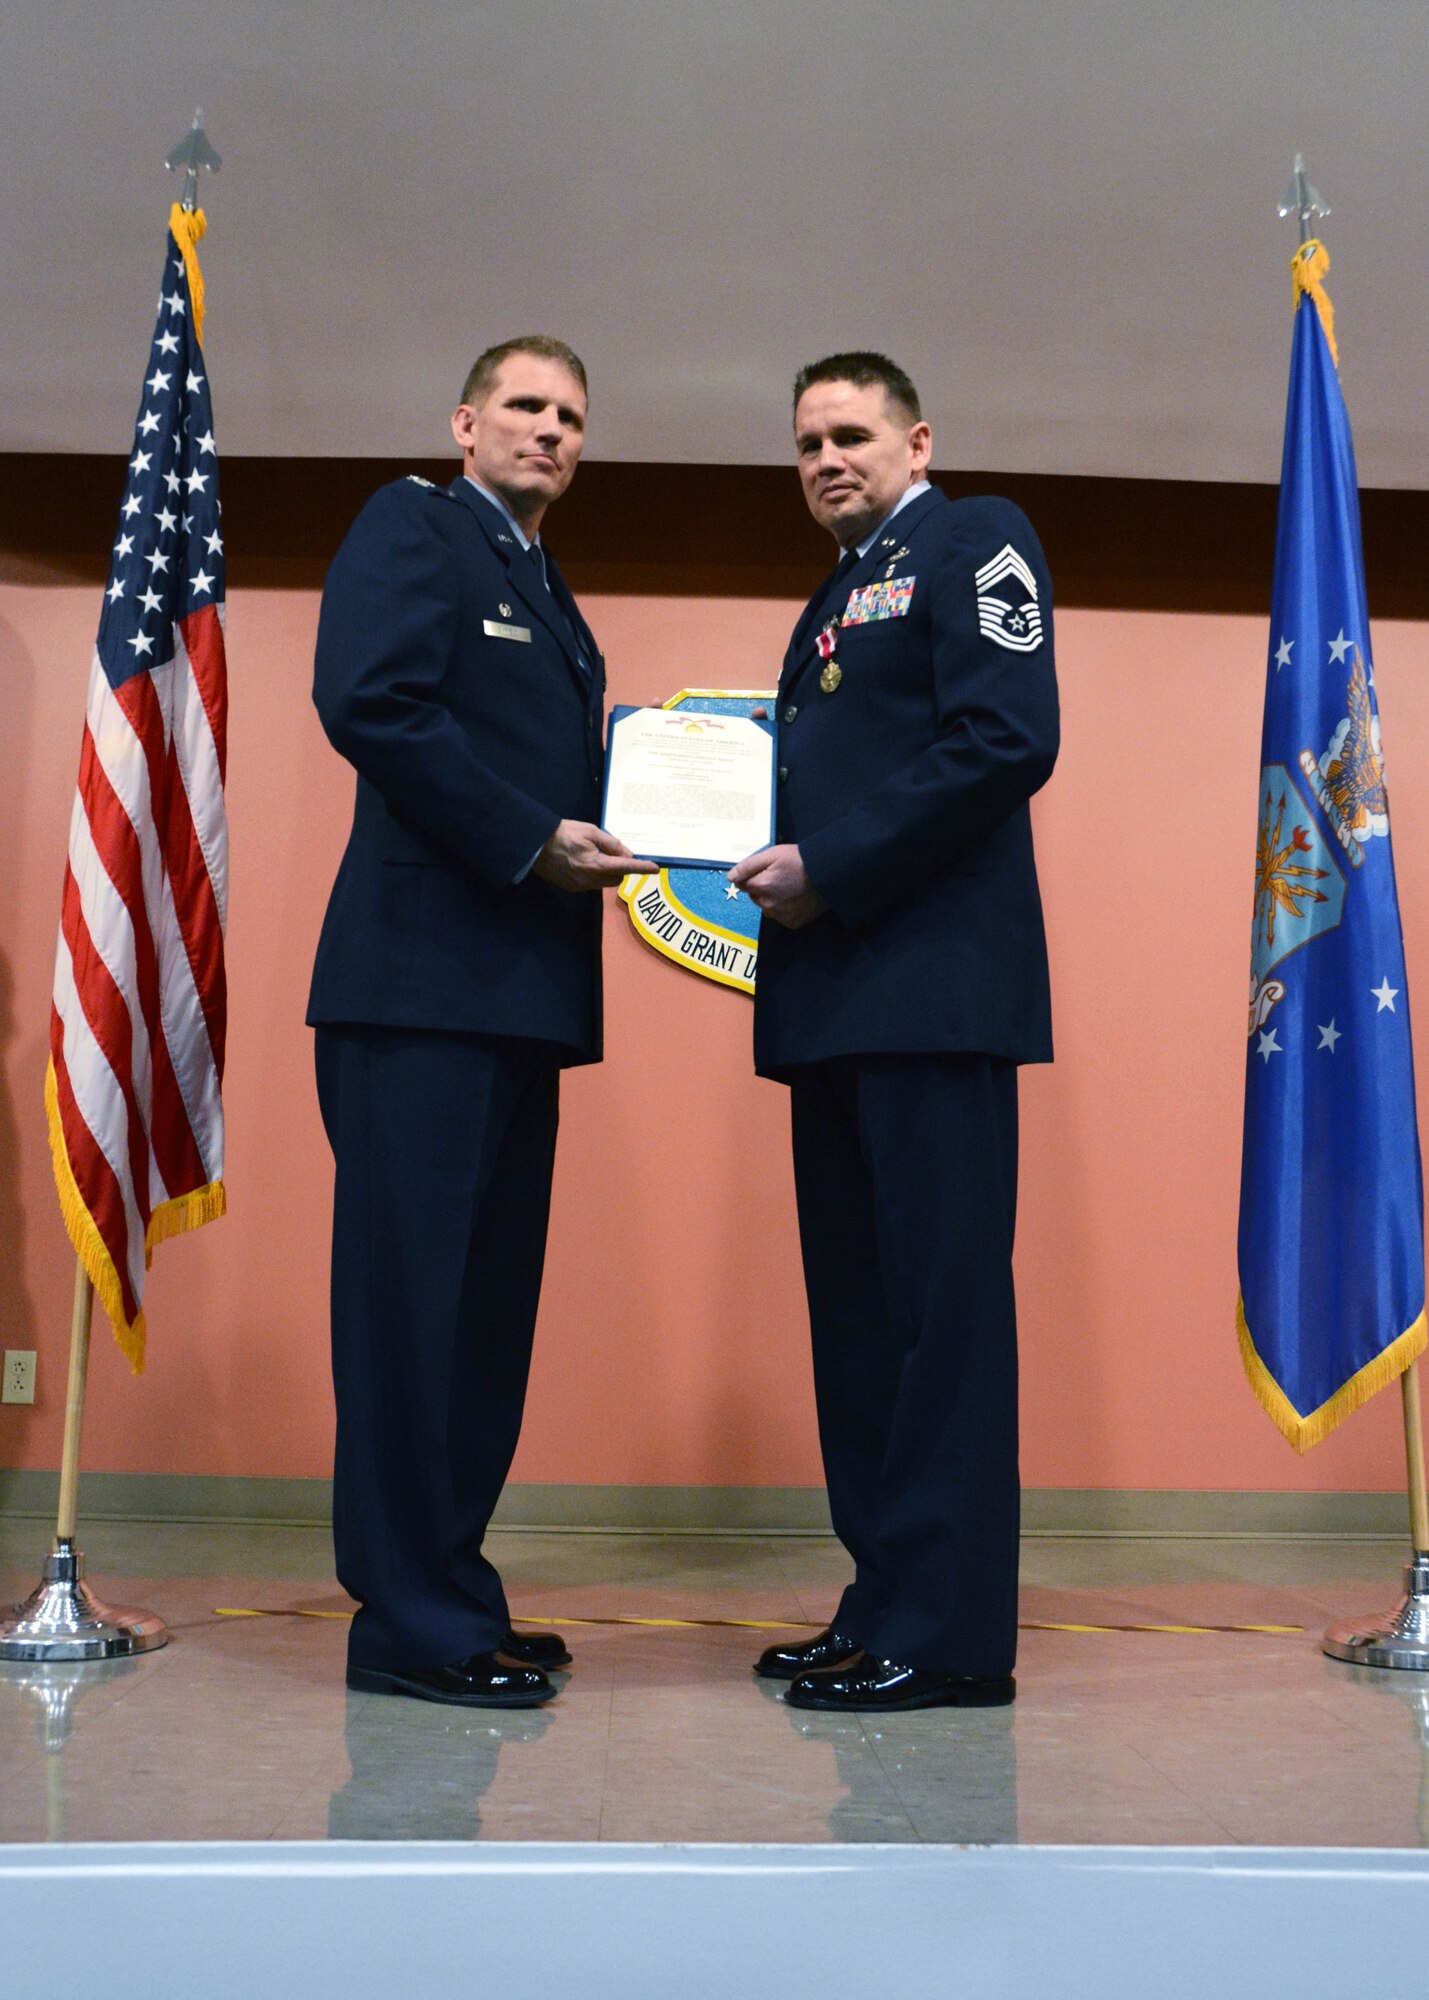 Chief Master Sgt. Michael E. McGillivray, 349th Mission Support Group superintendent, retires after 34 years and 11 months of service, April 2, 2016 at Travis Air Force Base. Col. David W. Enfield, 349th MSG commander, presided over the ceremony and lauded McGillivray for his constant outstanding service to the U.S. Air Force. In his closing remarks McGillivray thanked the many people throughout his career that challenged him to do more as an Airman, he said. 